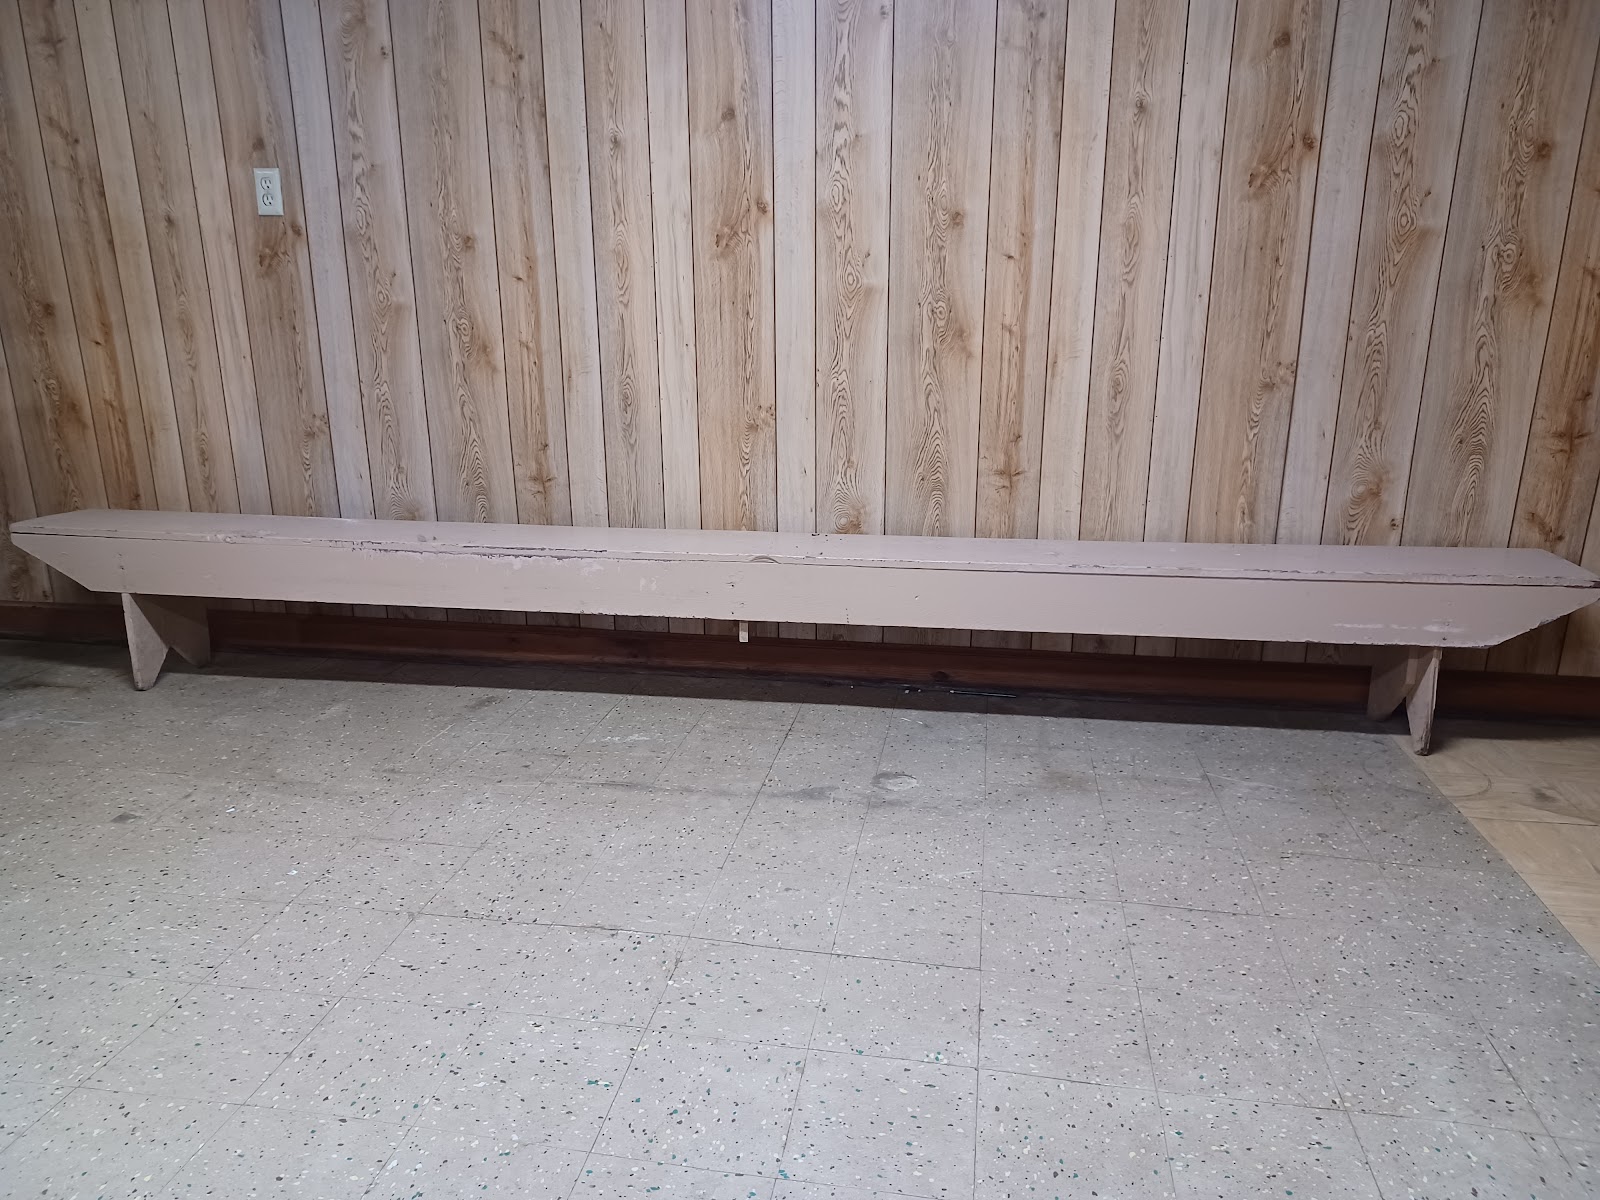 Sunday School Benches. Before and After